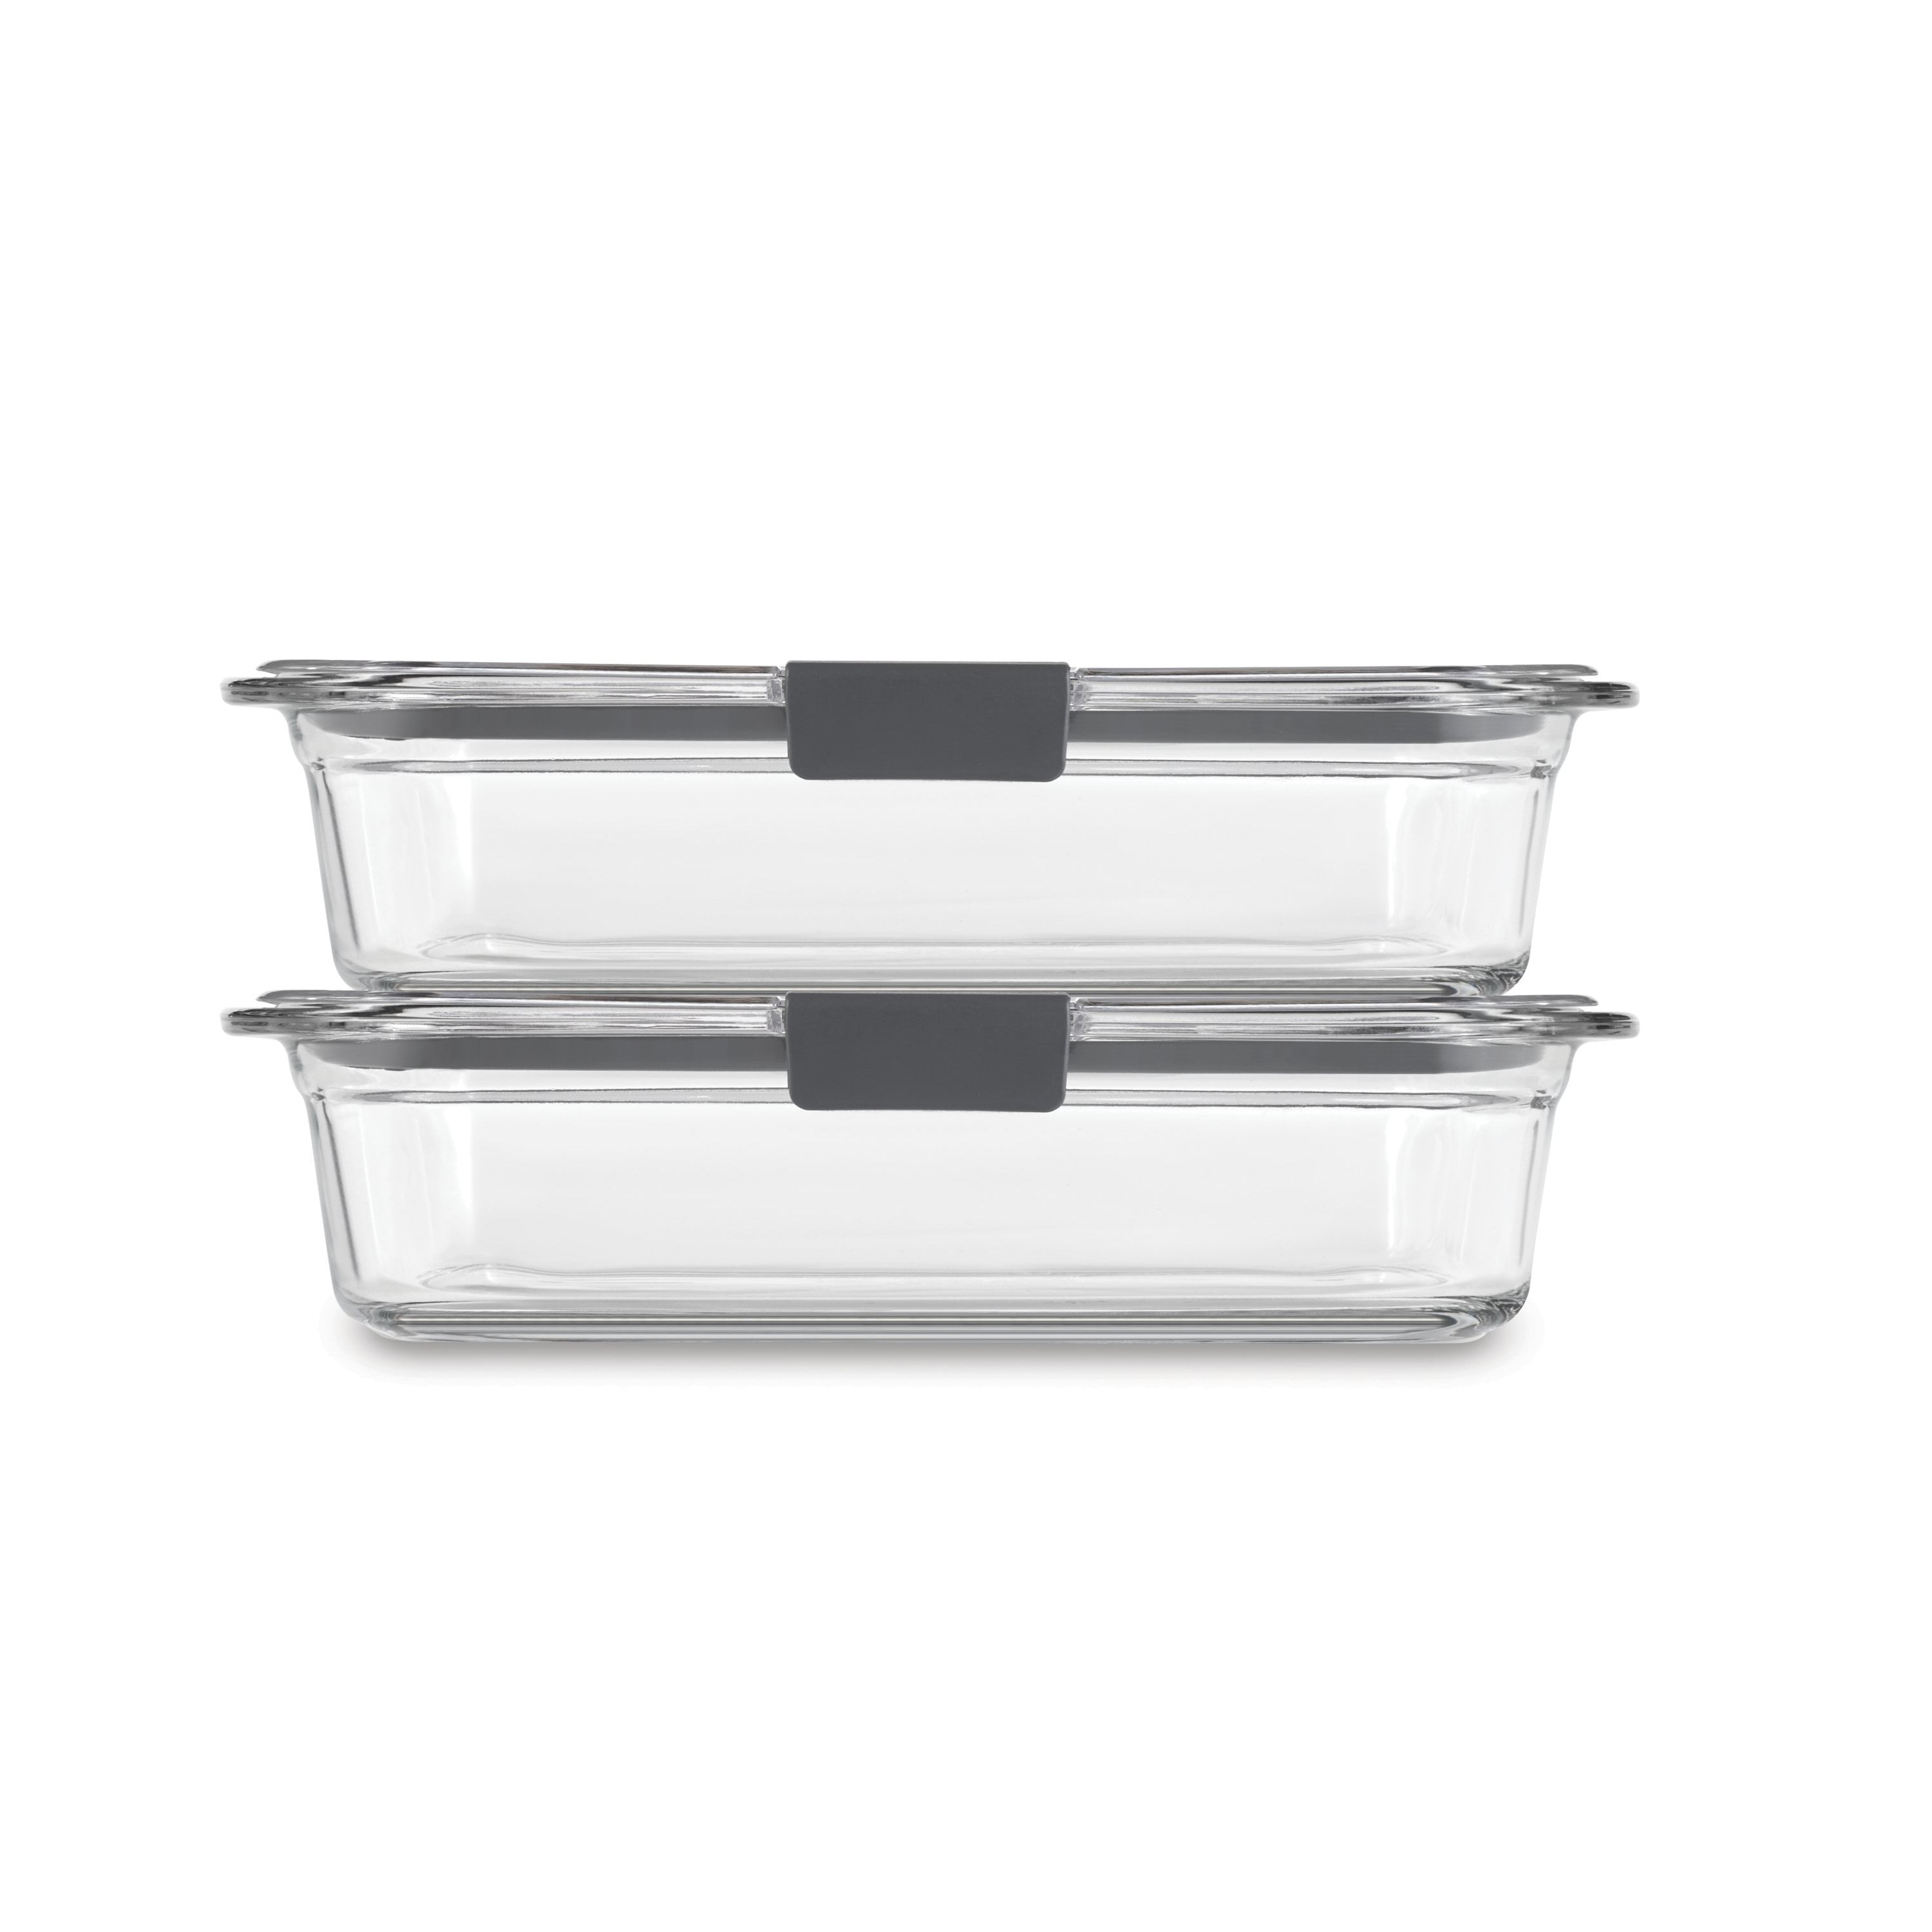 Rubbermaid® Brilliance Glass Food Storage Containers, 2 pk - Fred Meyer